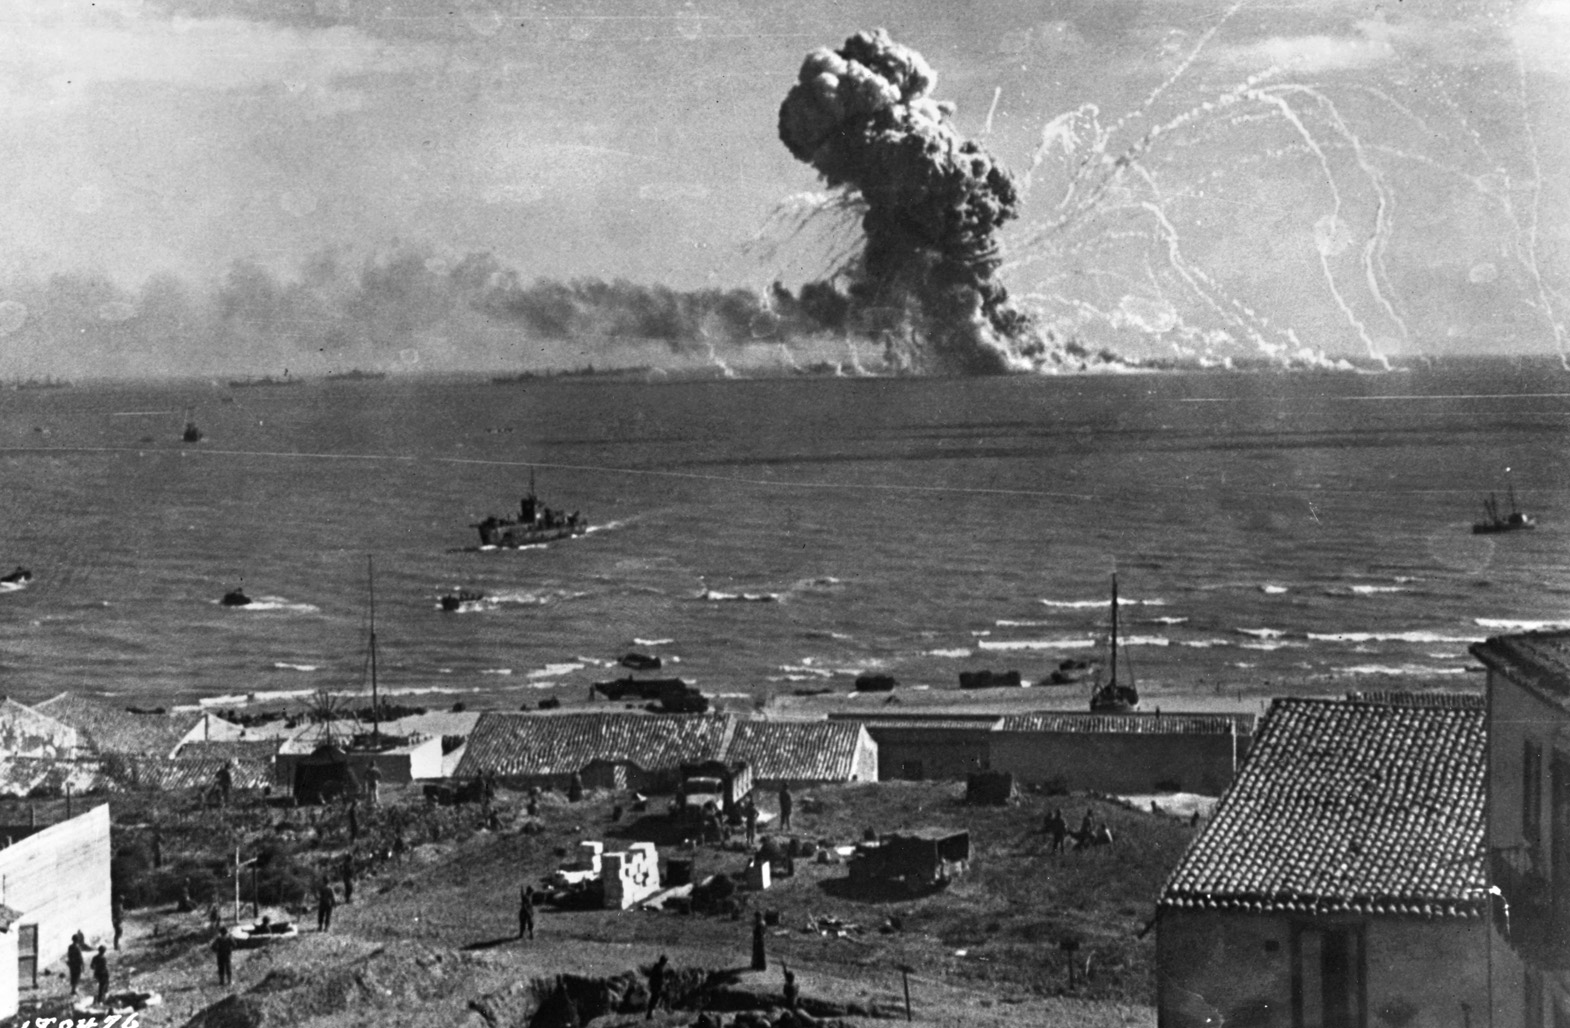 The ammunition ship SS Robert Rowan erupts in a spectacular explosion after being hit by a bomb from Luftwaffe Ju-88 bombers during the American landing operations off the coast of Gela, Sicily. The Germans were largely unopposed in the air during the landings.